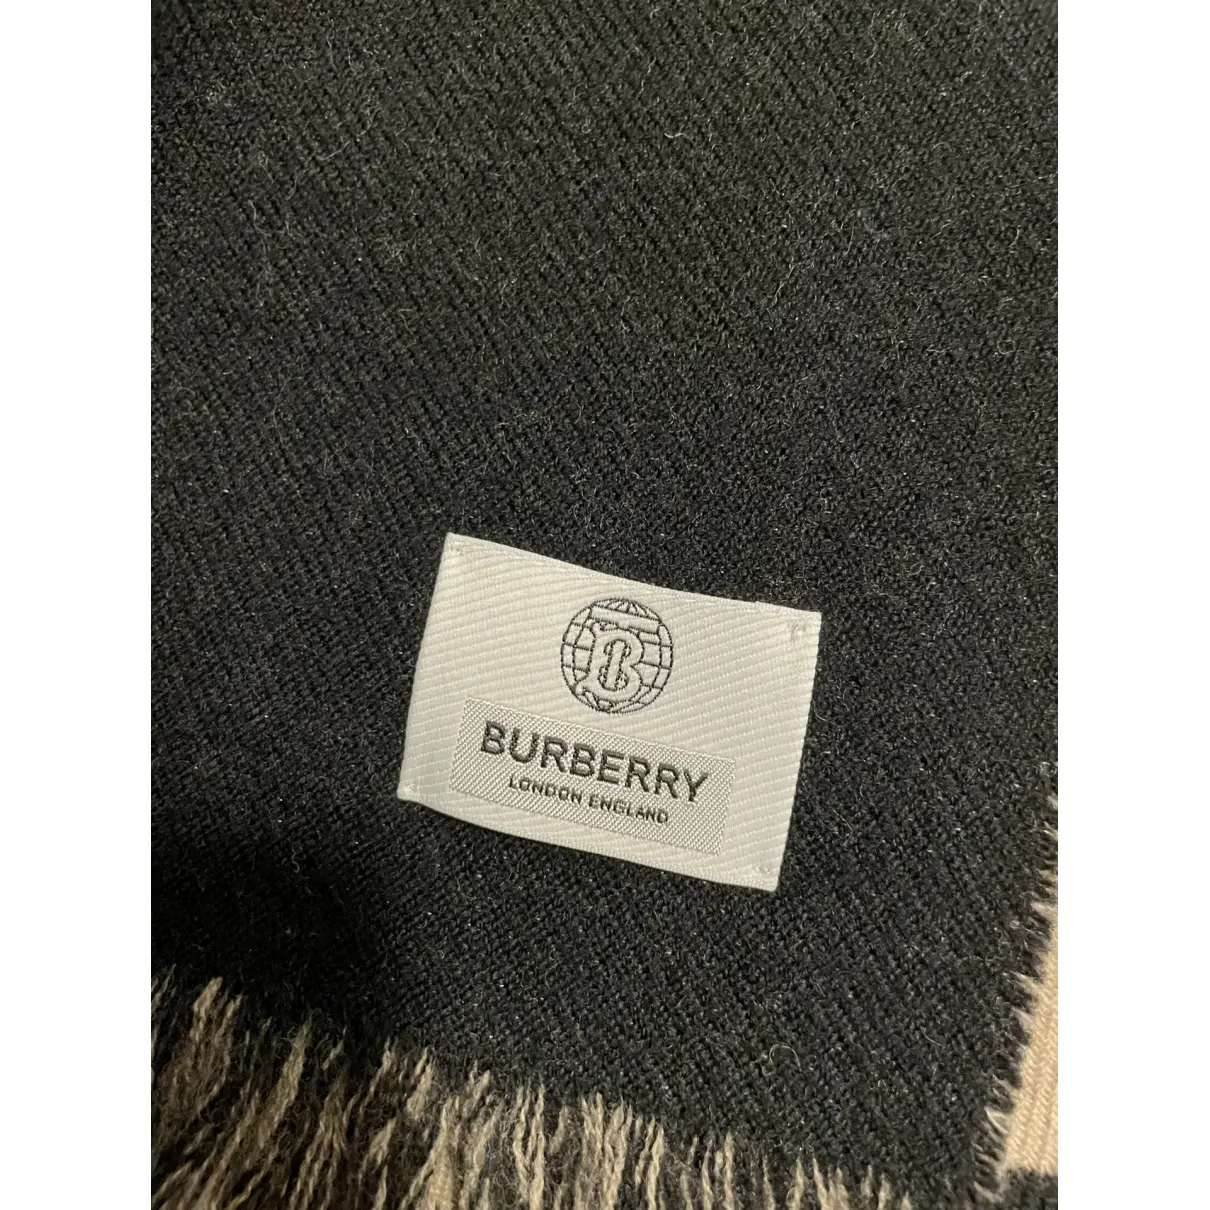 Buy Burberry Wool scarf & pocket square online